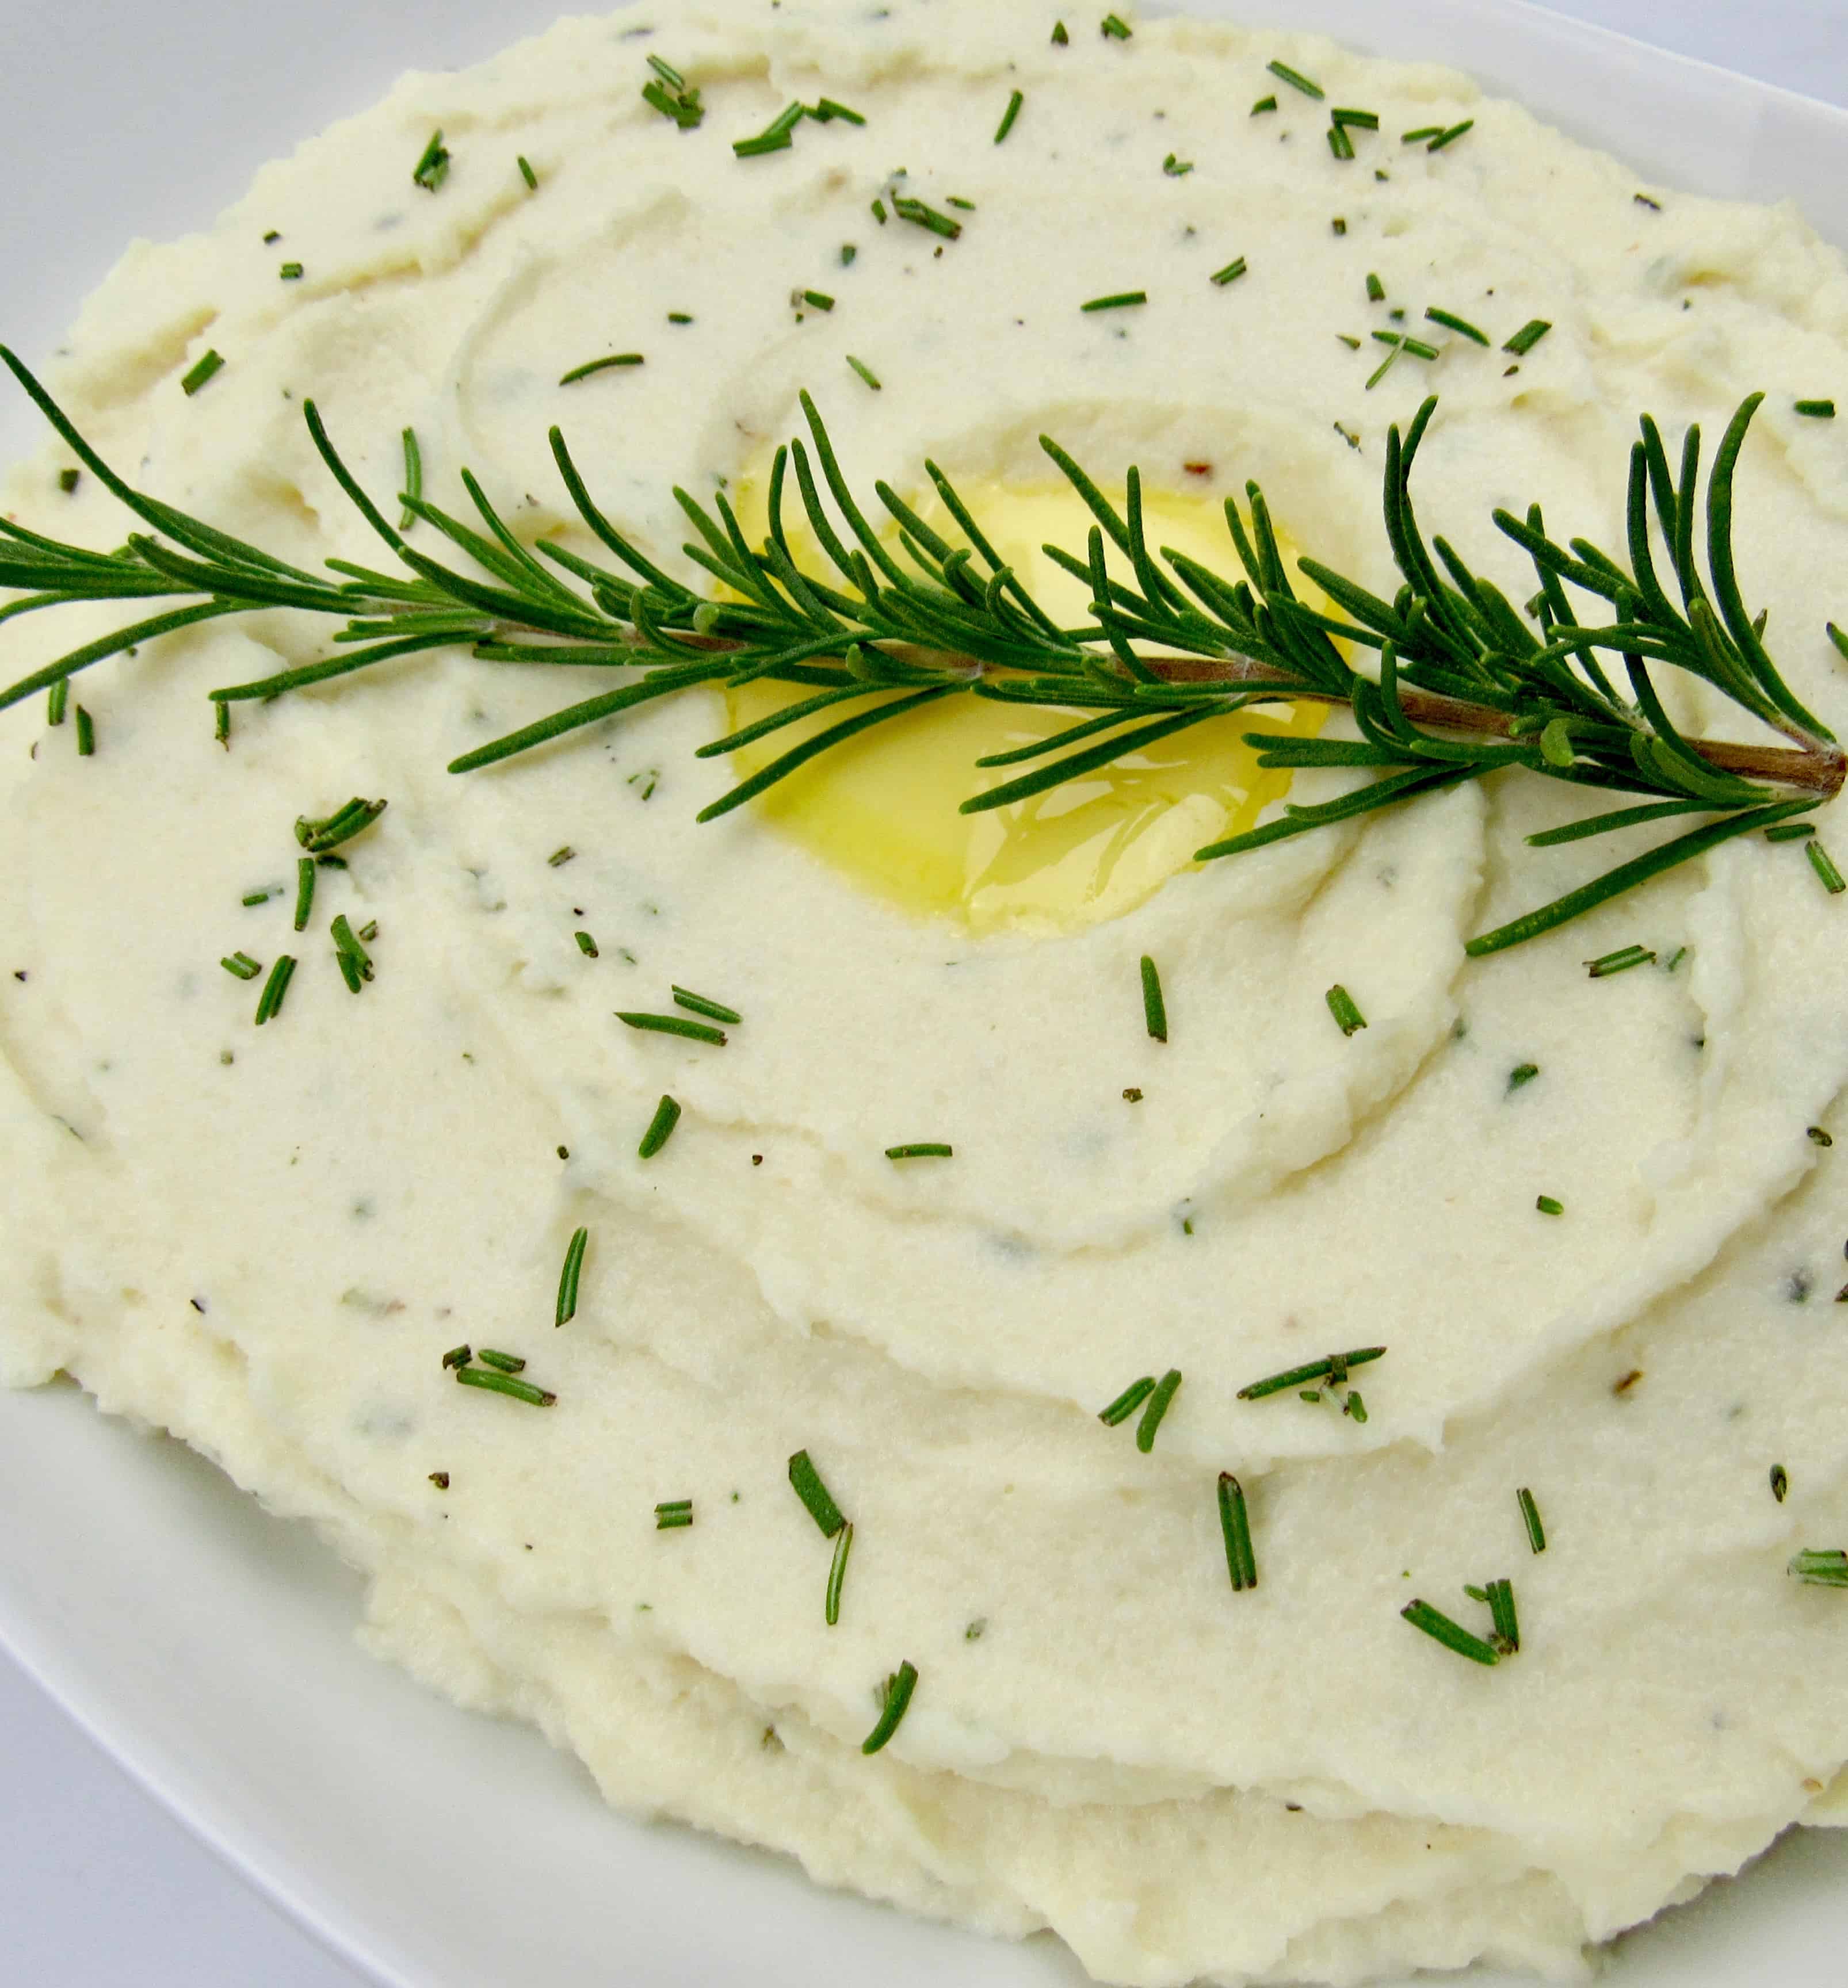 mashed cauliflower closeup with rosemary sprig on top